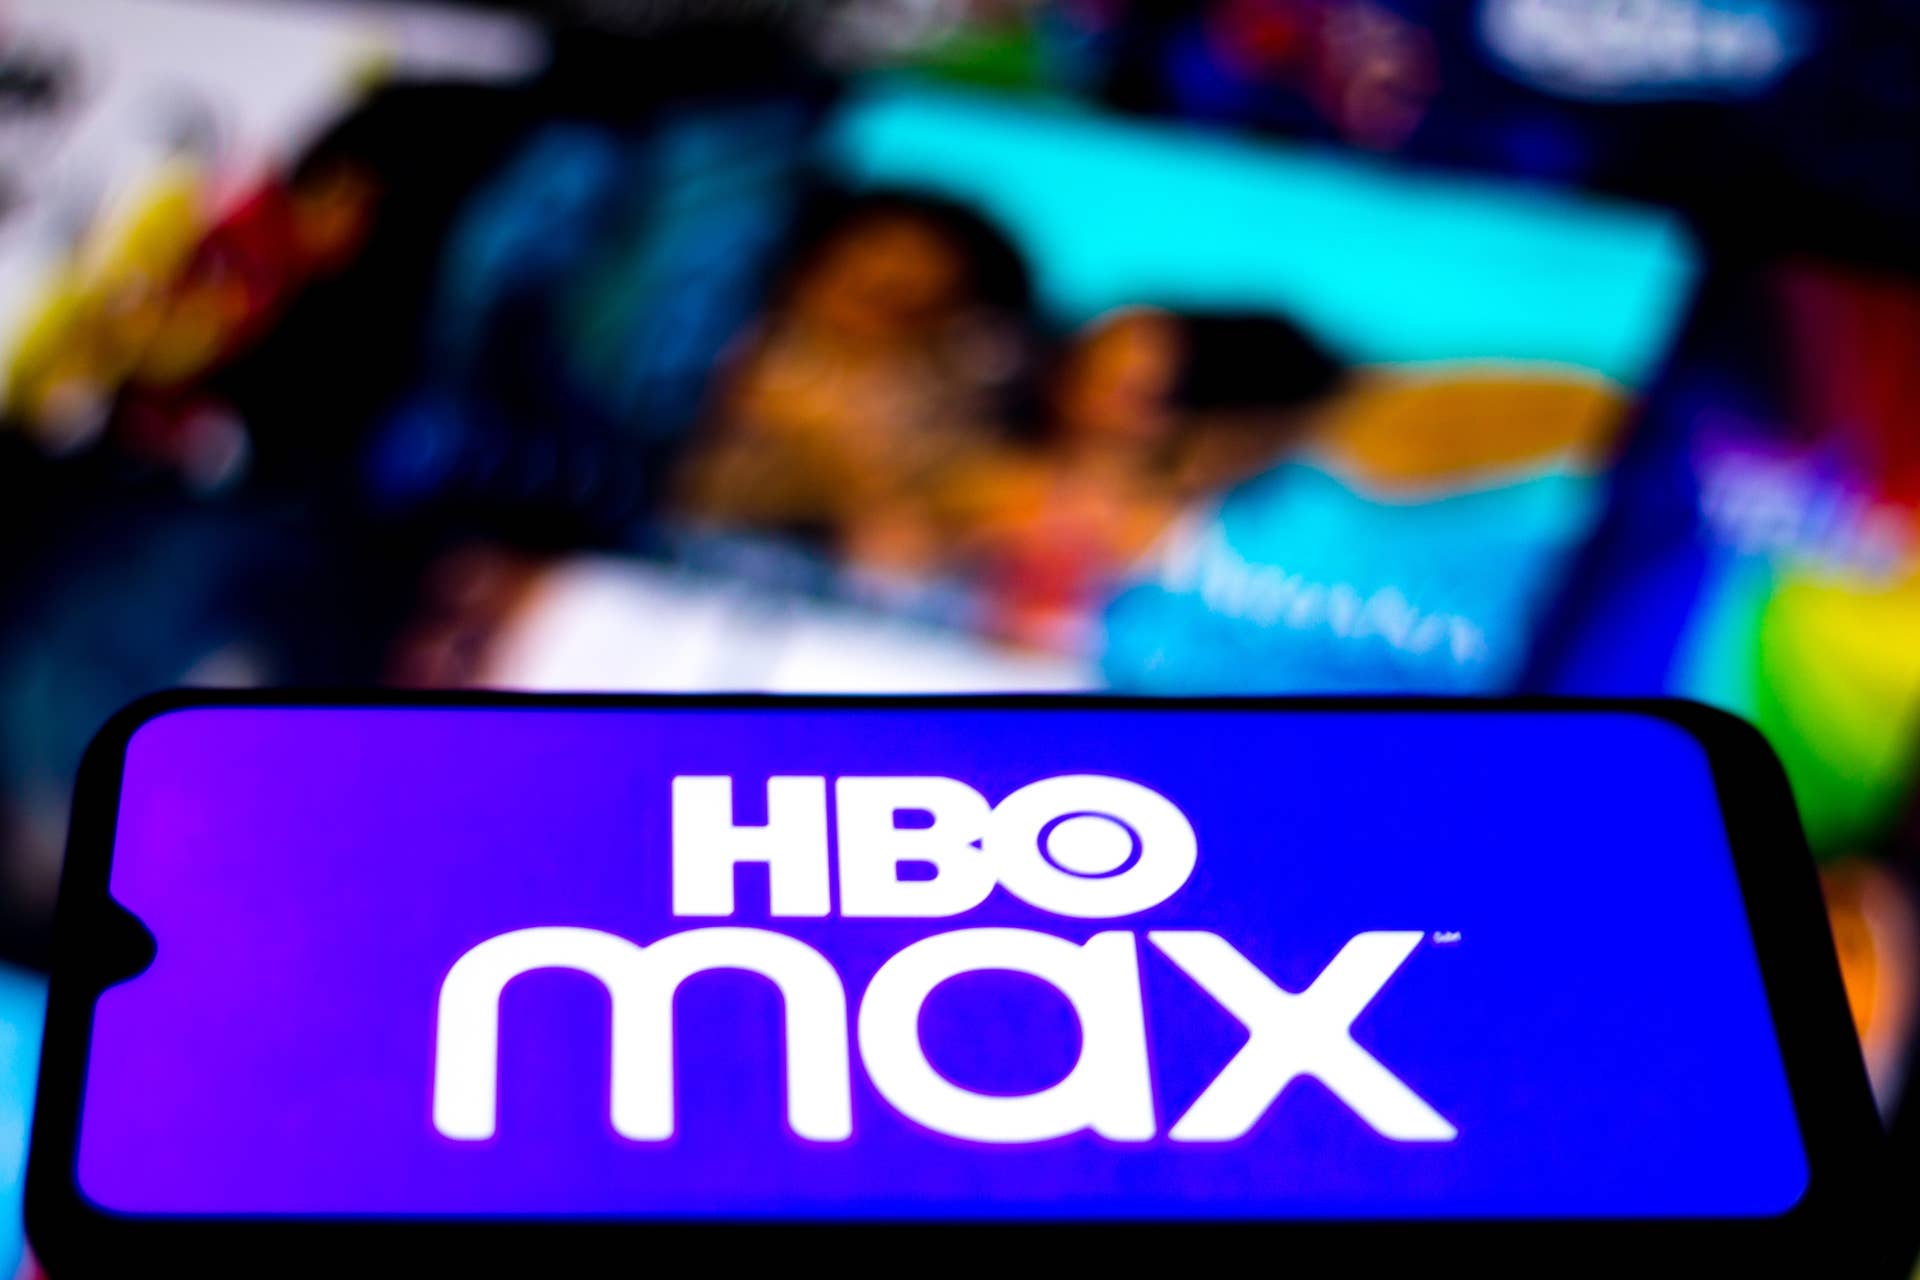 HBO Max logo seen displayed on a smartphone